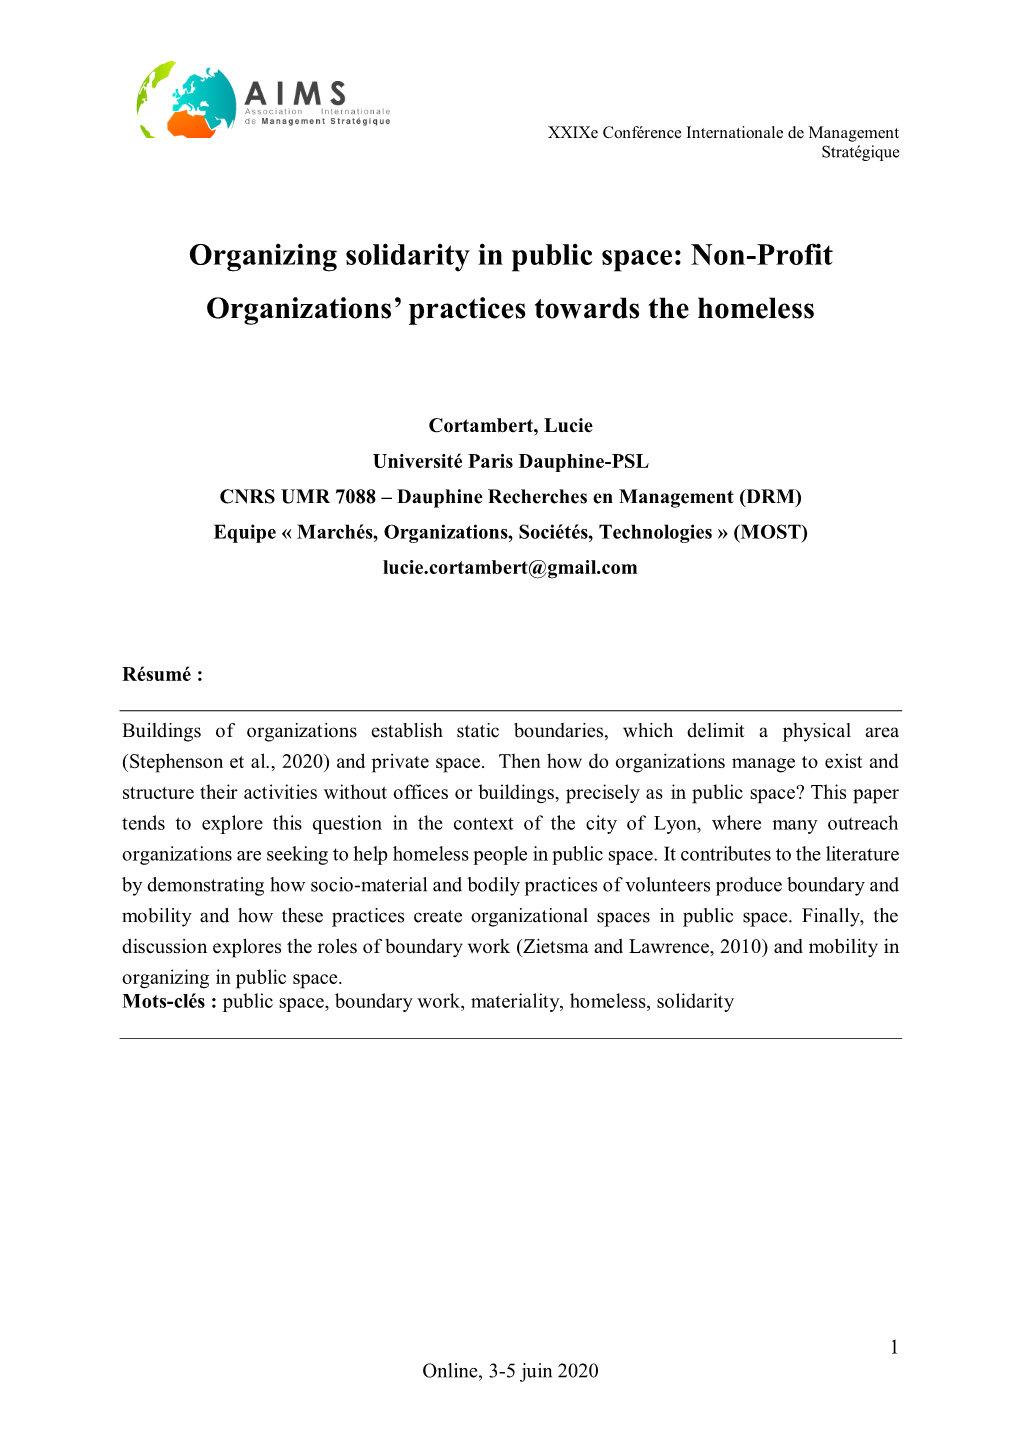 Organizing Solidarity in Public Space: Non-Profit Organizations’ Practices Towards the Homeless